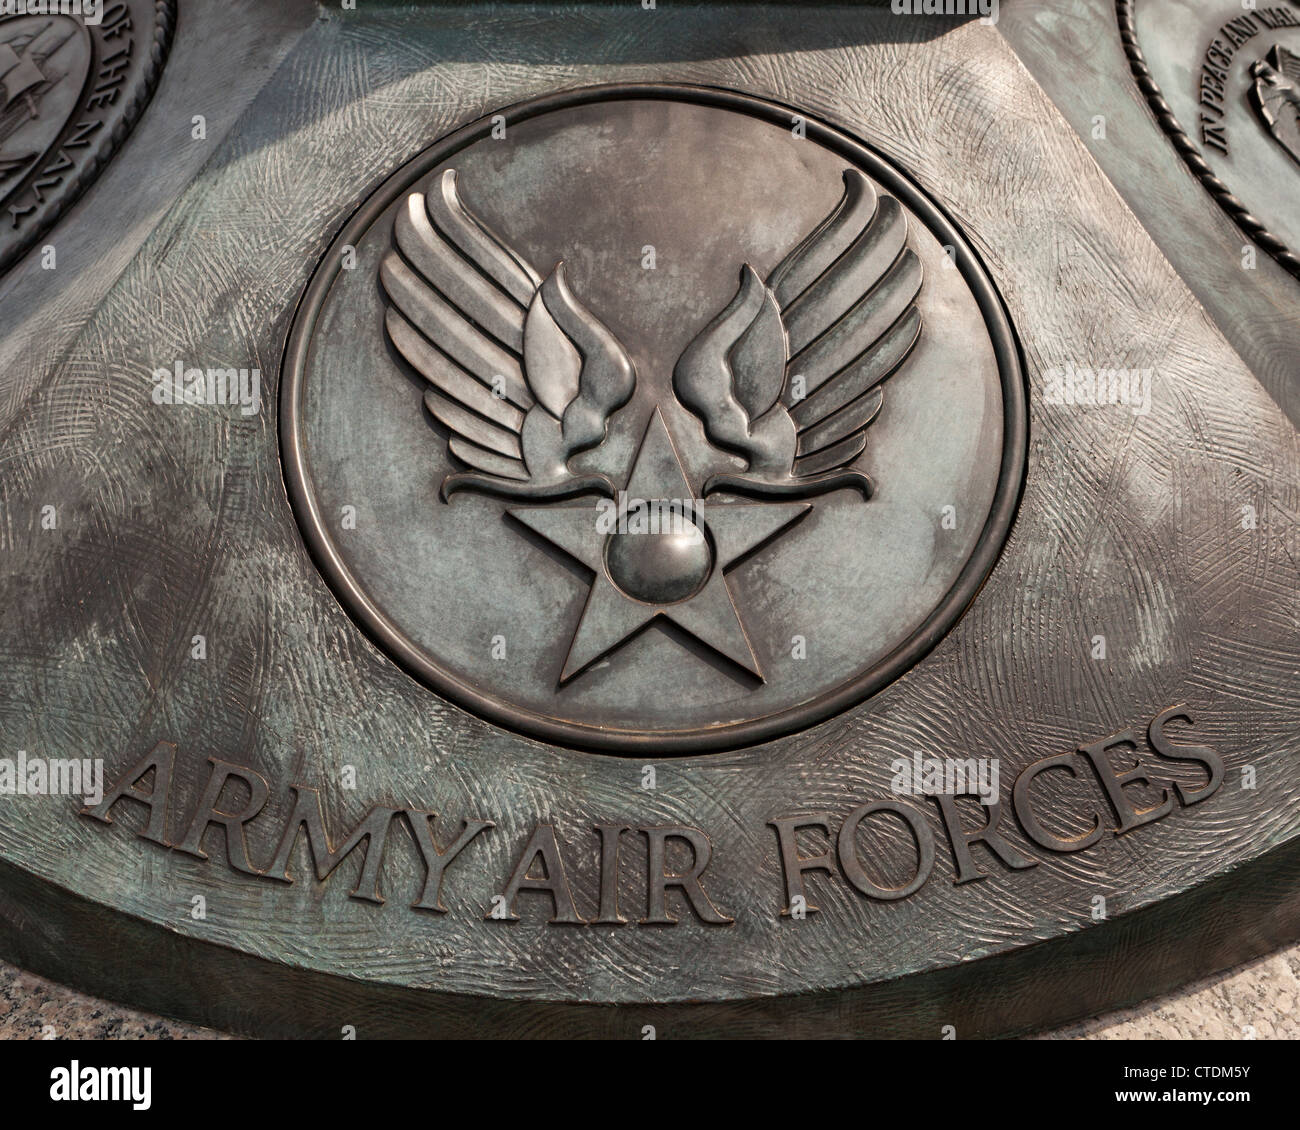 US Army Air Forces seal Stockfoto